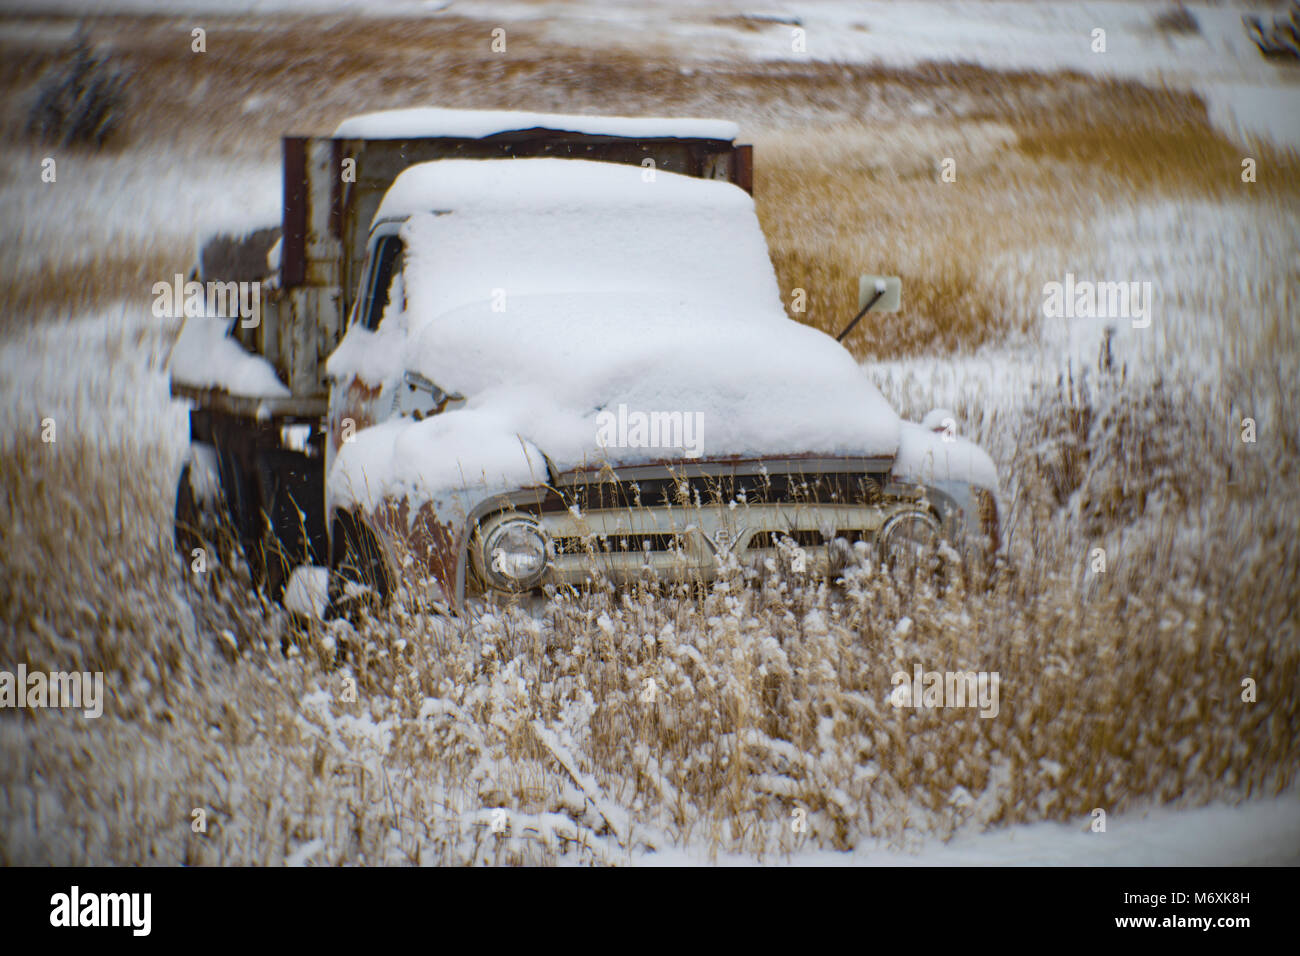 A 1953 Ford dump truck, in a snow-covered field, in Philipsburg, Montana. Stock Photo